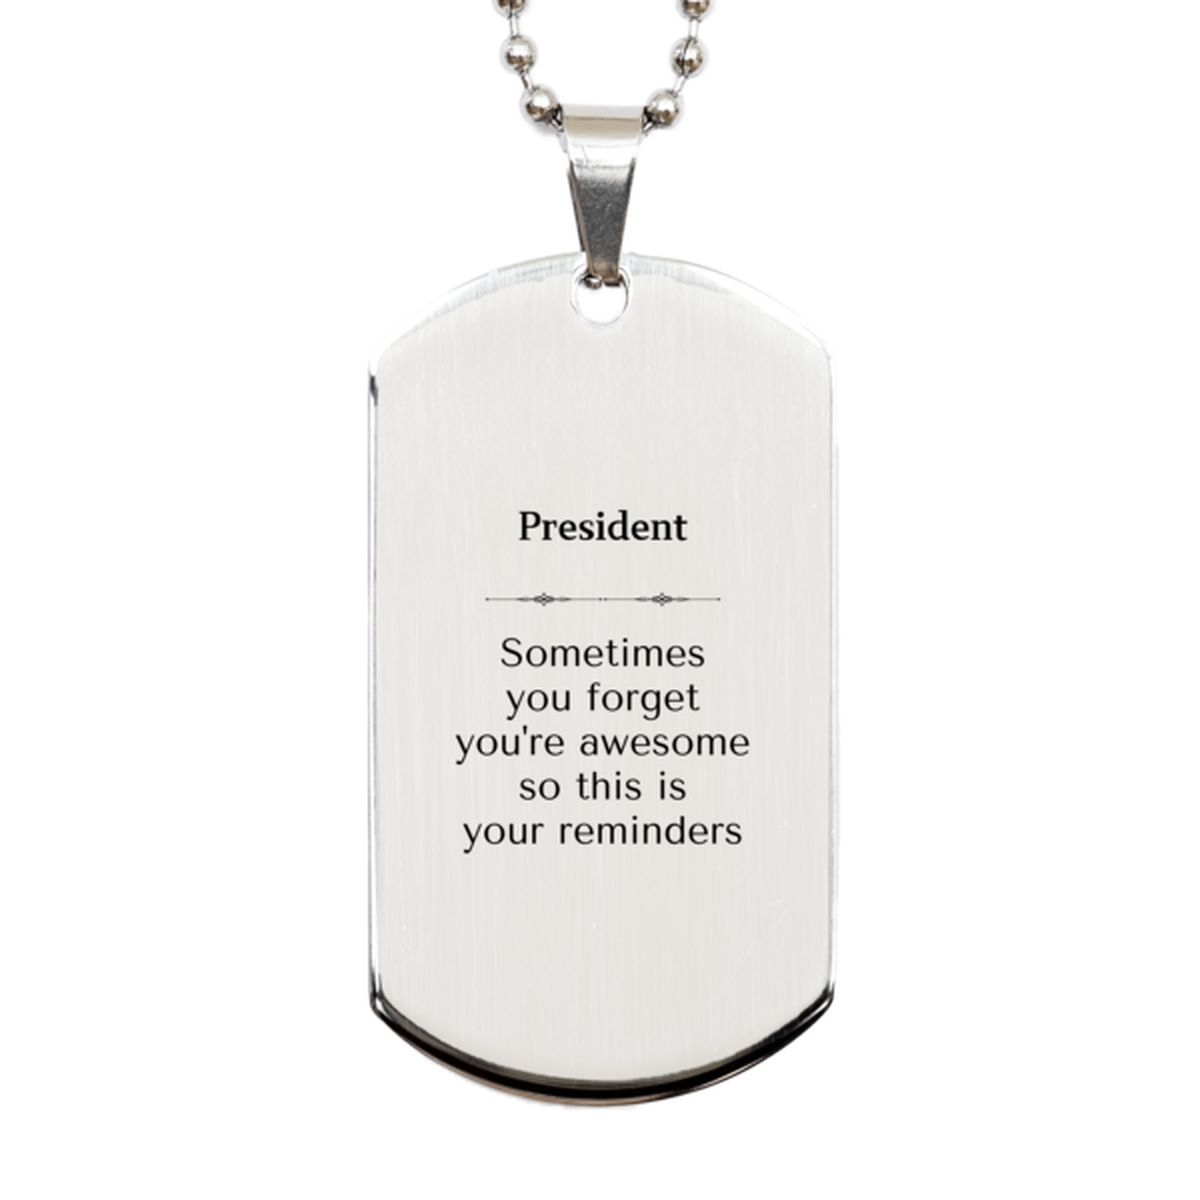 Sentimental President Silver Dog Tag, President Sometimes you forget you're awesome so this is your reminders, Graduation Christmas Birthday Gifts for President, Men, Women, Coworkers